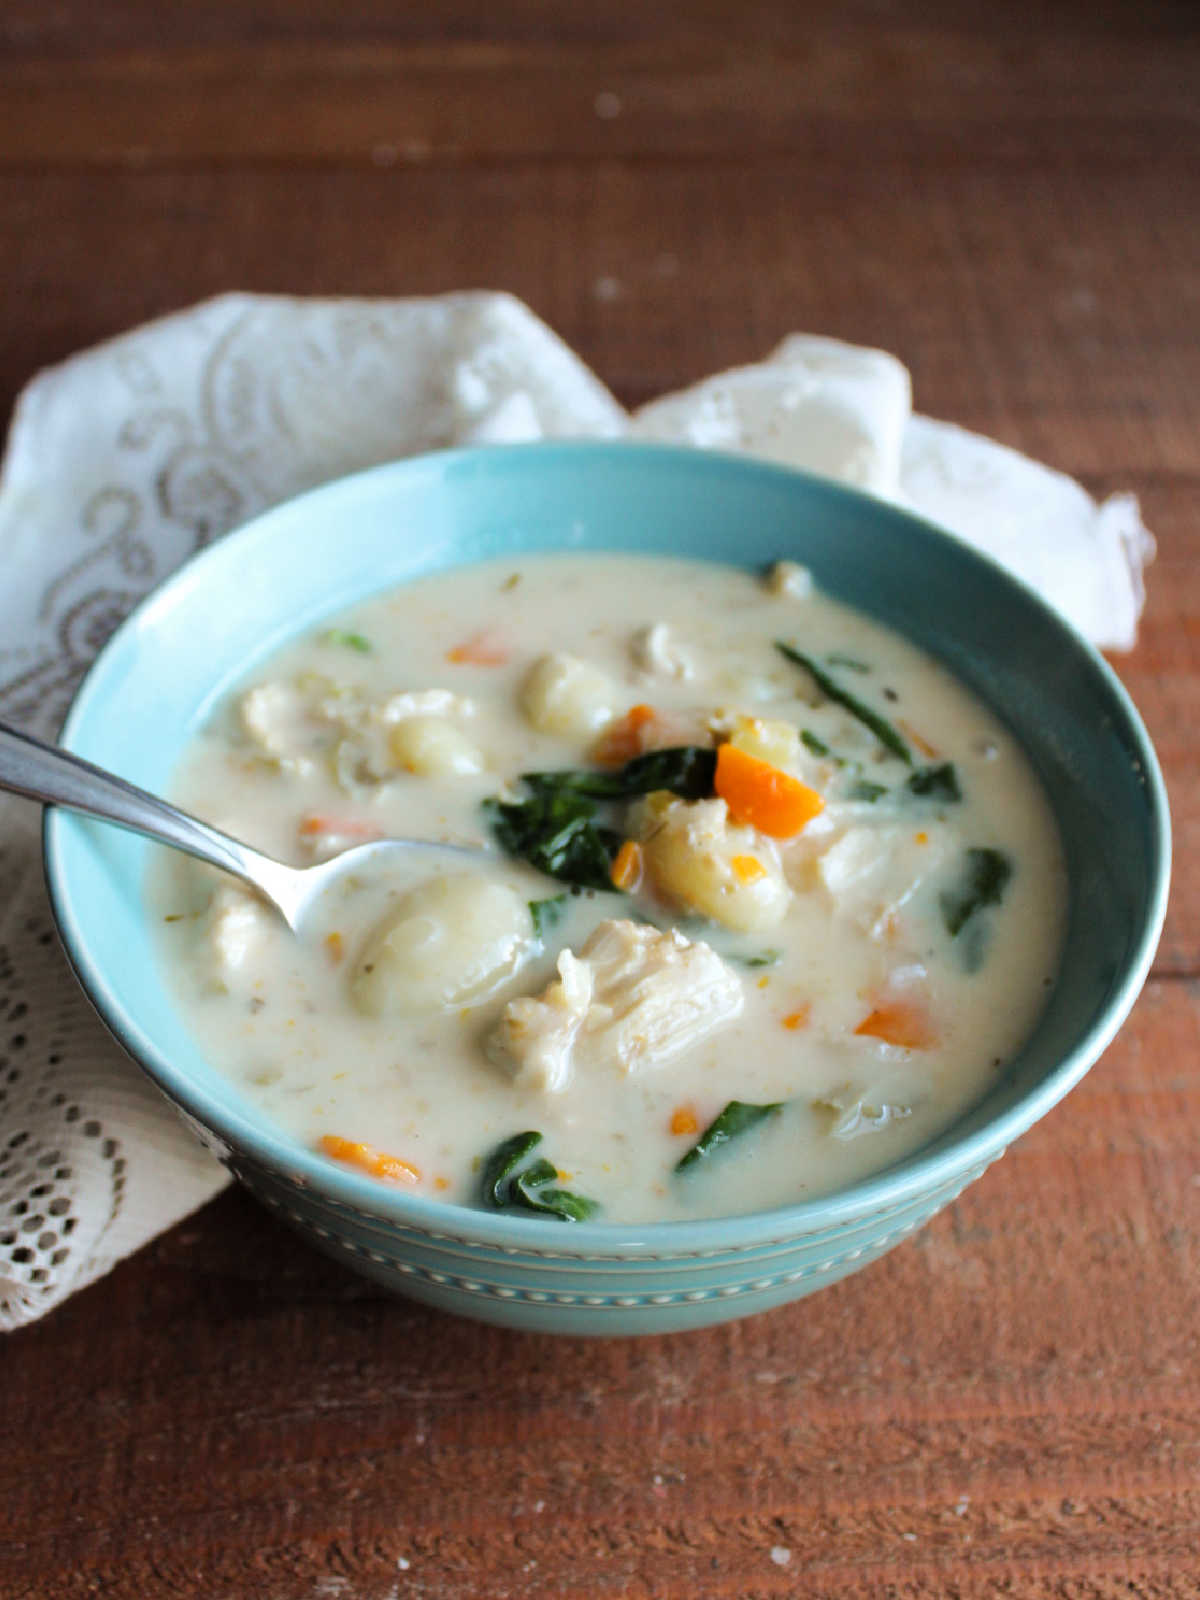 Bowl of chicken gnocchi soup showing the tender gnocchi with plenty of veggies and chicken in a thick, creamy broth.